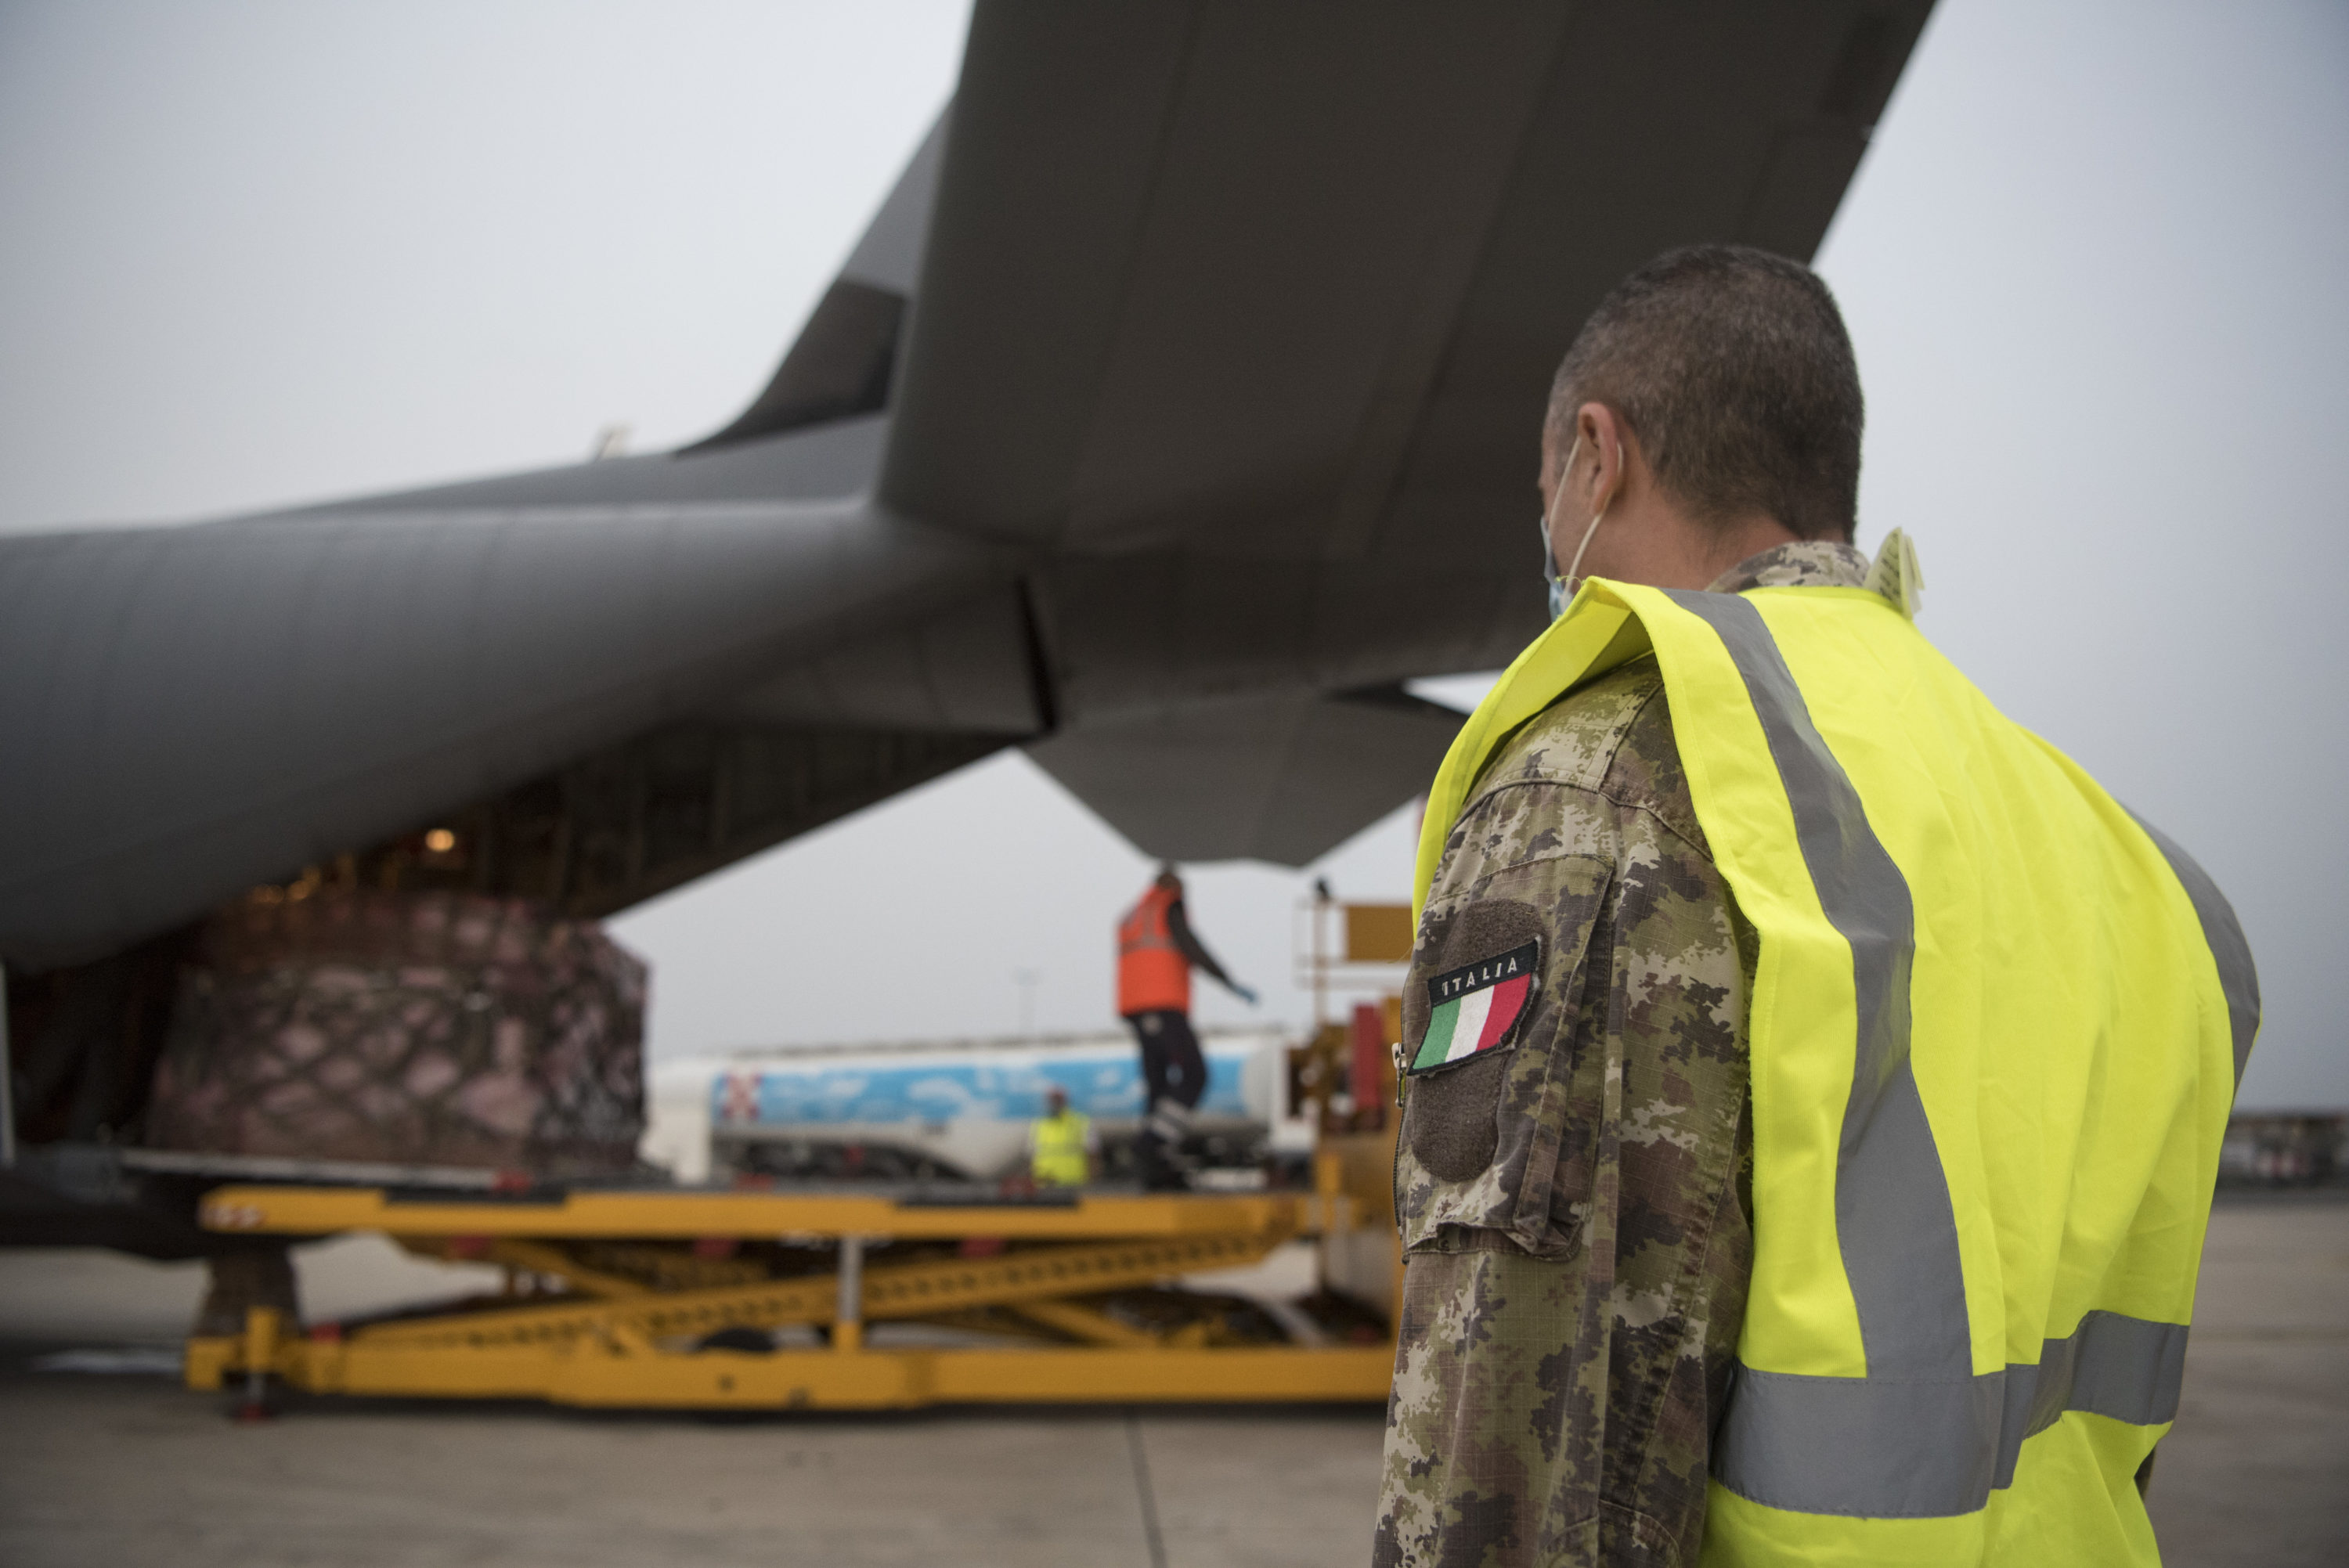 An Italian air force member stands-by as a pallet of medical supplies from Milan, Italy is off-loaded from an 86th Airlift Wing C-130J Super Hercules in Rome (U.S. Air Force photo by Senior Airman Kristof J. Rixmann)